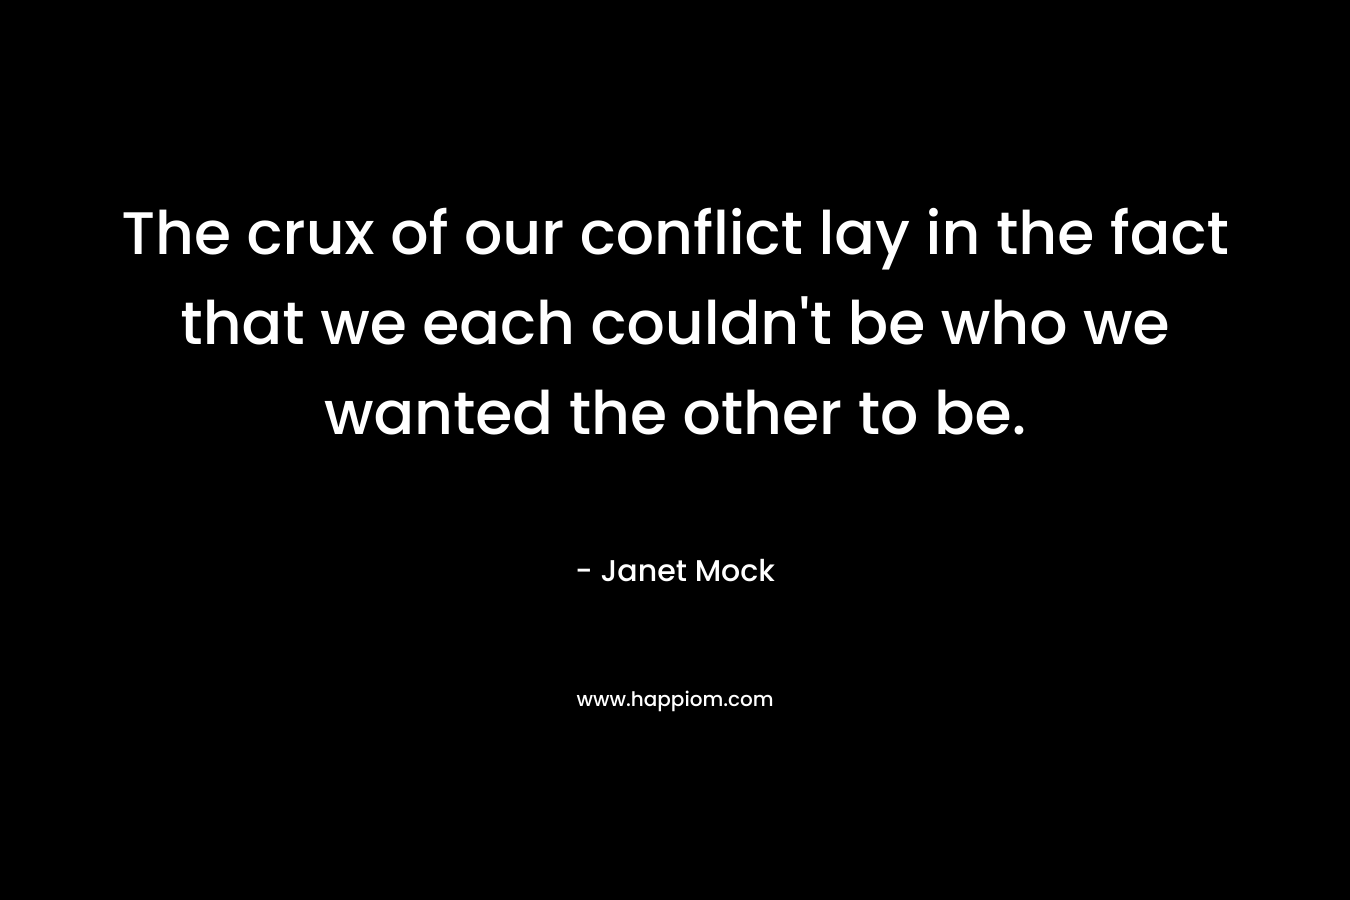 The crux of our conflict lay in the fact that we each couldn’t be who we wanted the other to be. – Janet Mock